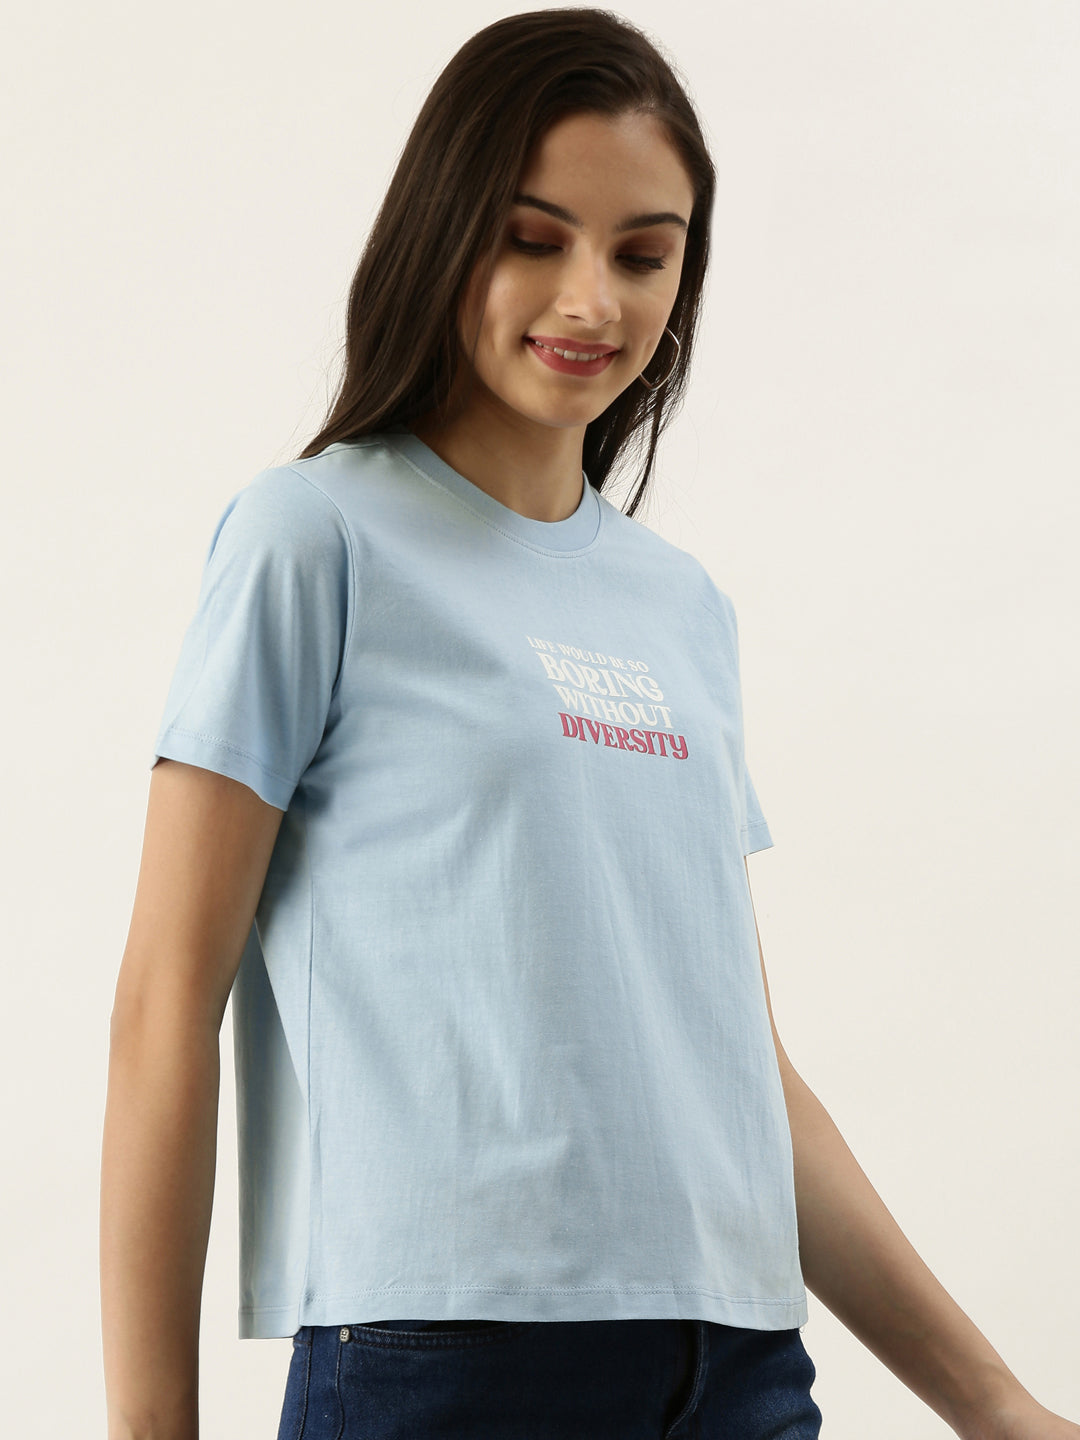 Blue Printed T-Shirt For Women